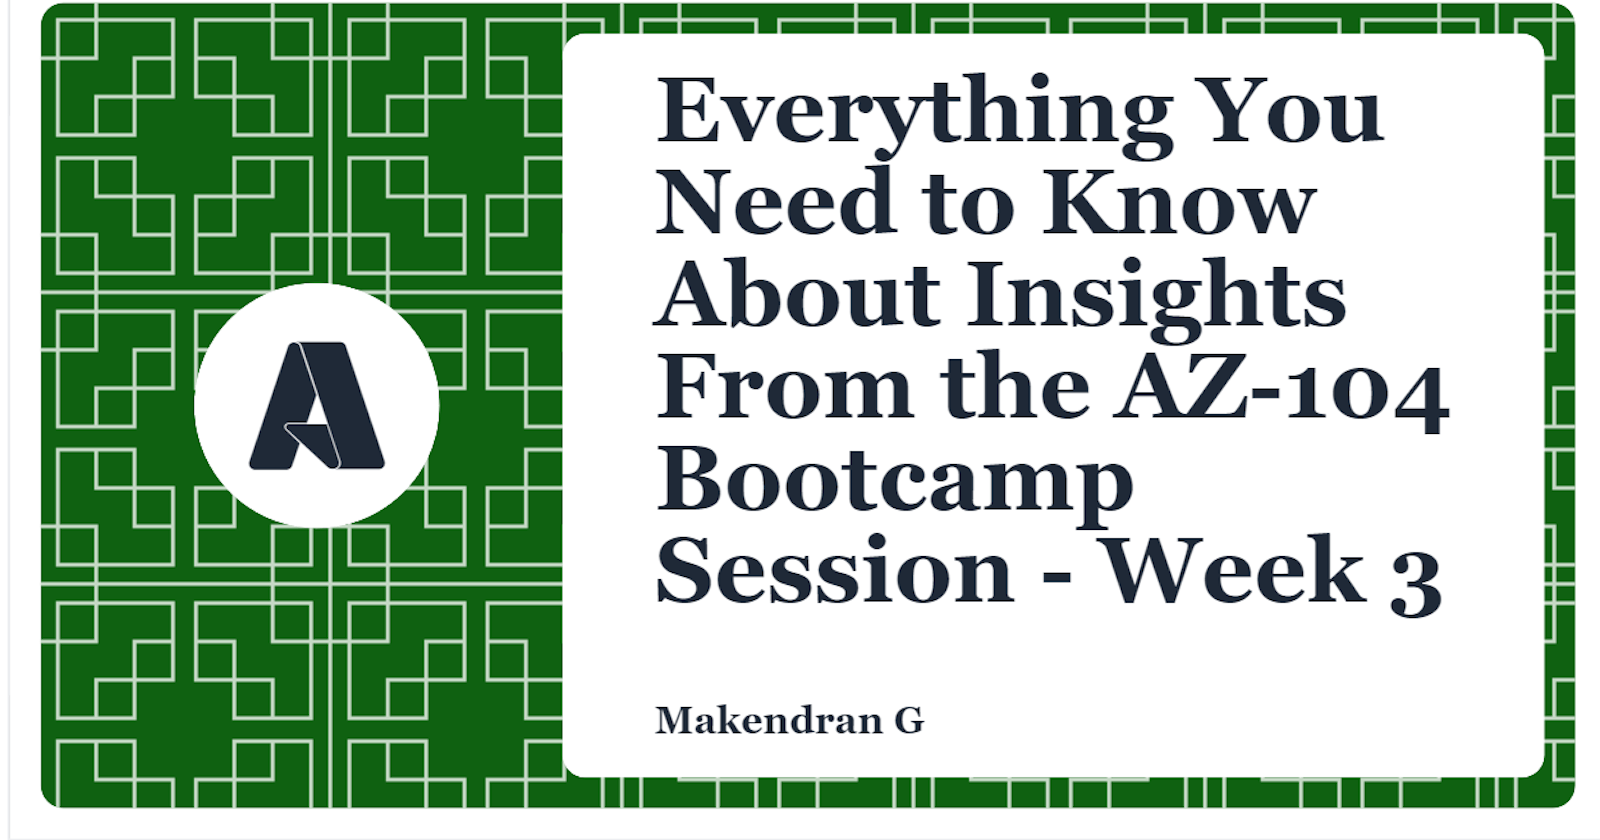 Everything You Need to Know About Insights From the AZ-104 Bootcamp Session - Week 3